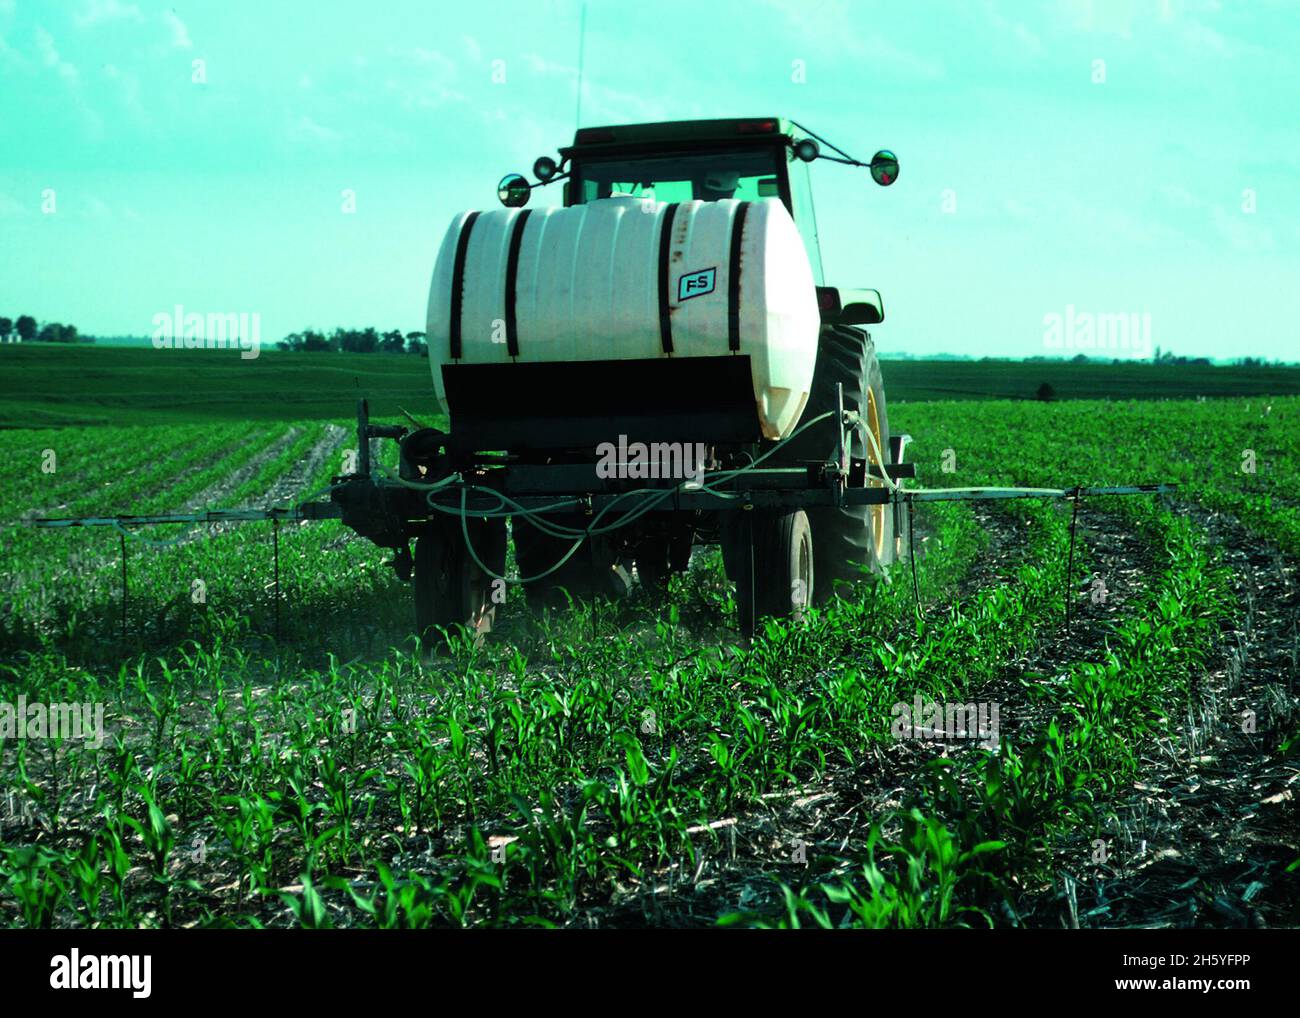 Nitrogen being applied to growing corn in a contoured, no-tilled field in Hardin County. Applying smaller amounts of nitrogen several times over the growing season rather than all at once at or before planting helps the plants use the nitrogen rather than have it enter water supplies ca. 2011 or earlier Stock Photo